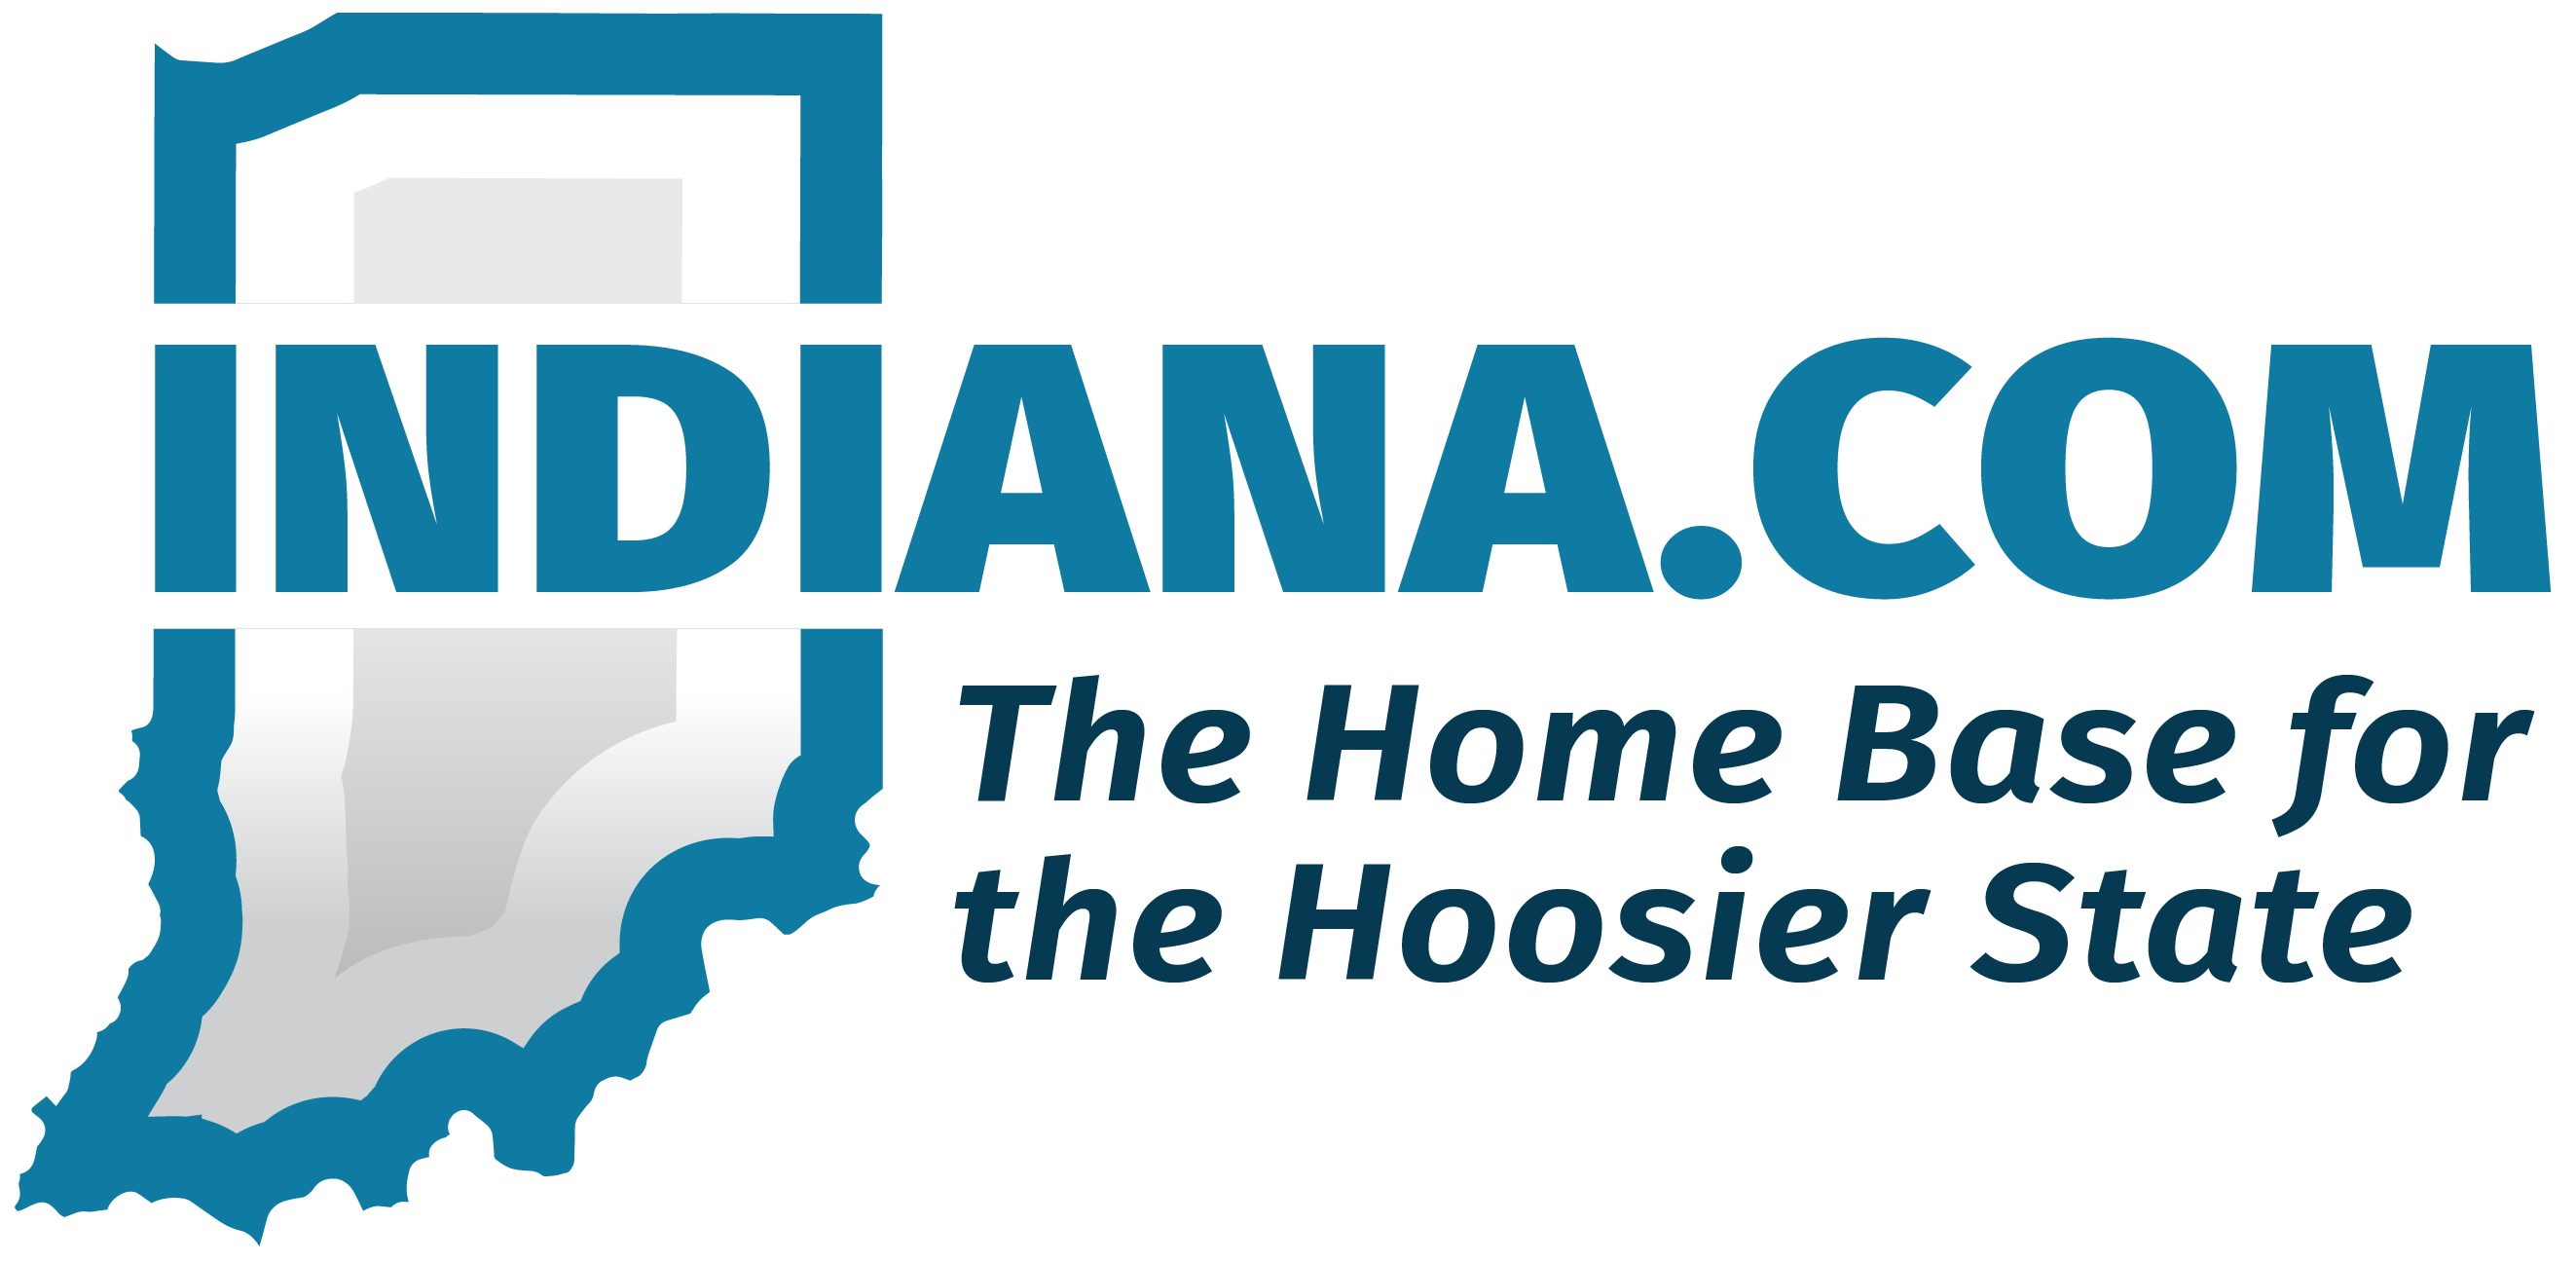 State of Indiana.com